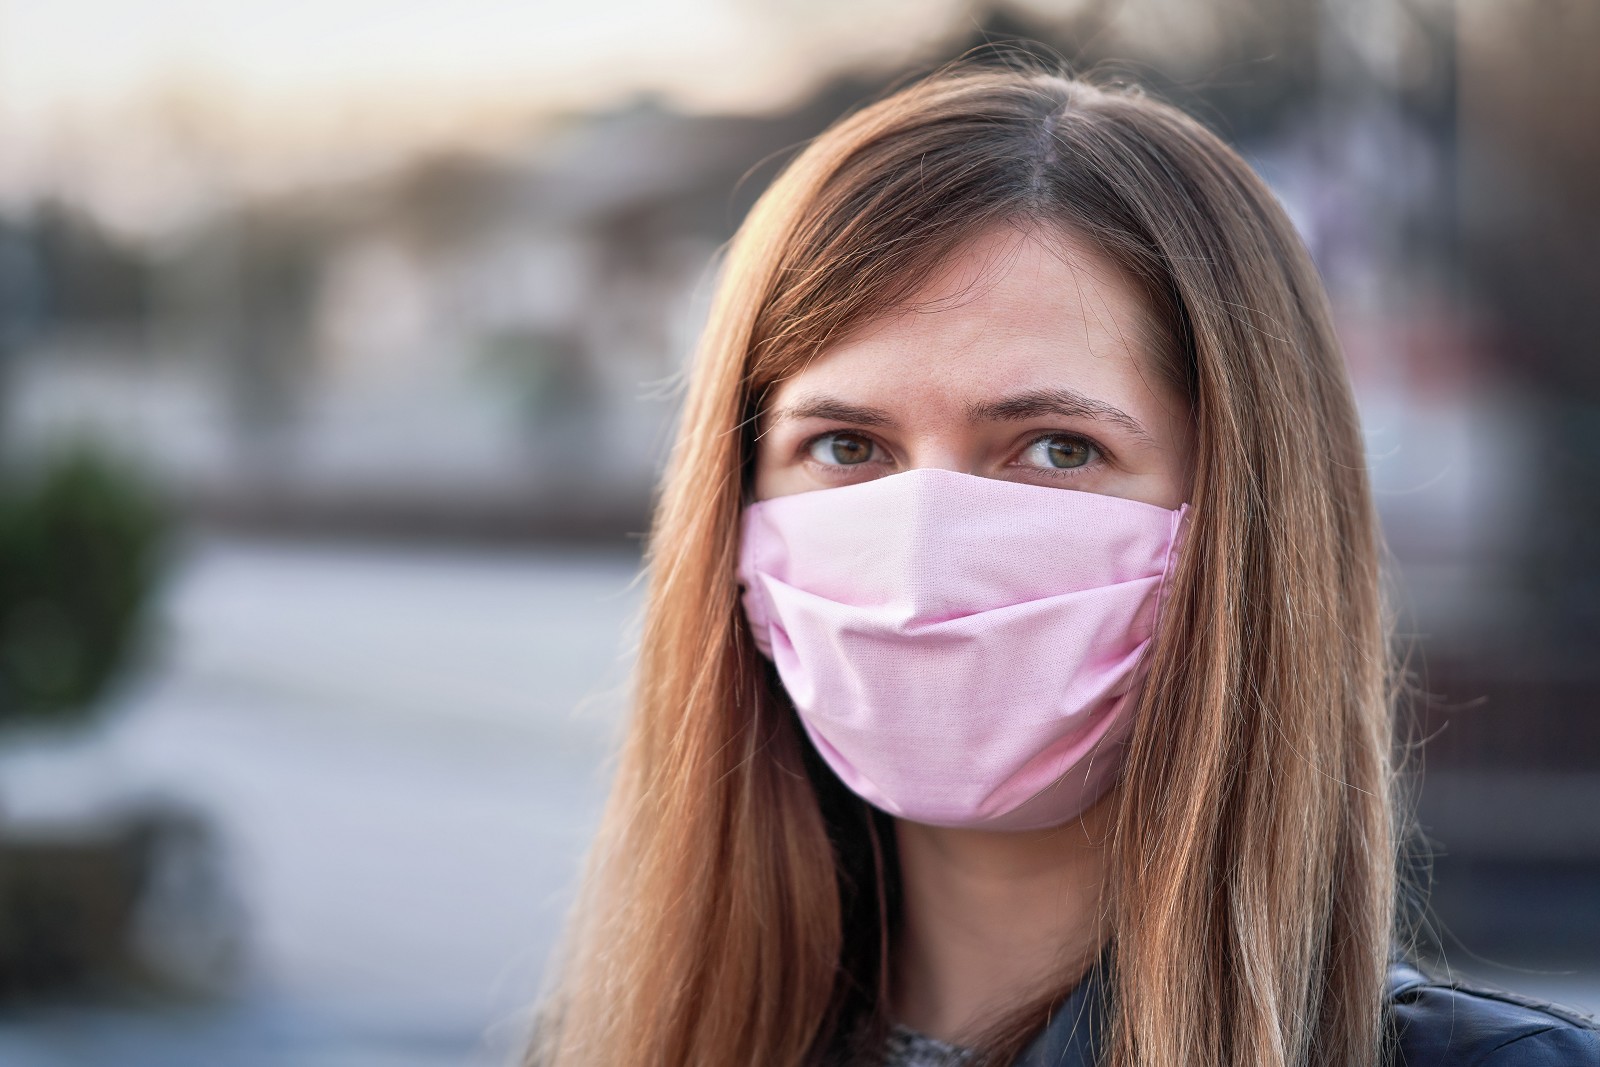 Masks Are Now Mandatory for Everyone at Thunder Bay Regional Health Sciences Centre